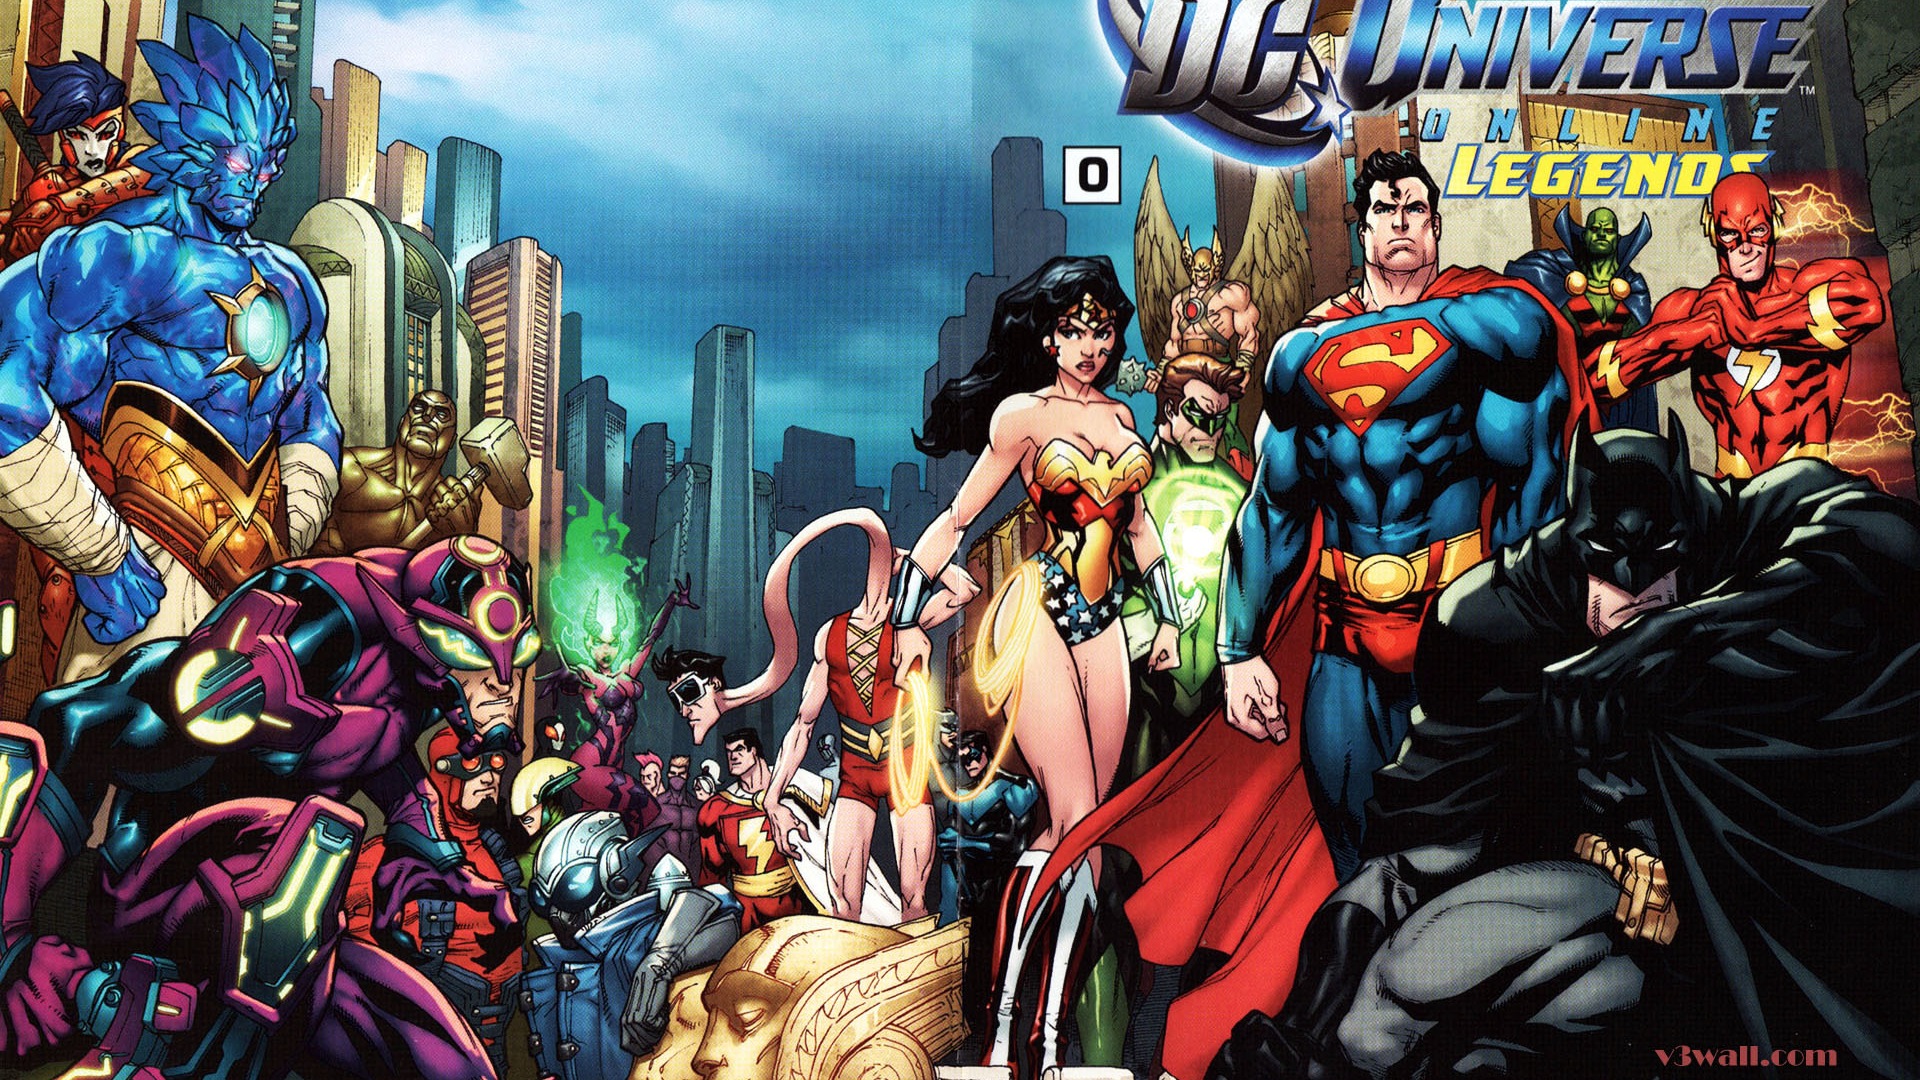 DC Universe Online HD game wallpapers #24 - 1920x1080